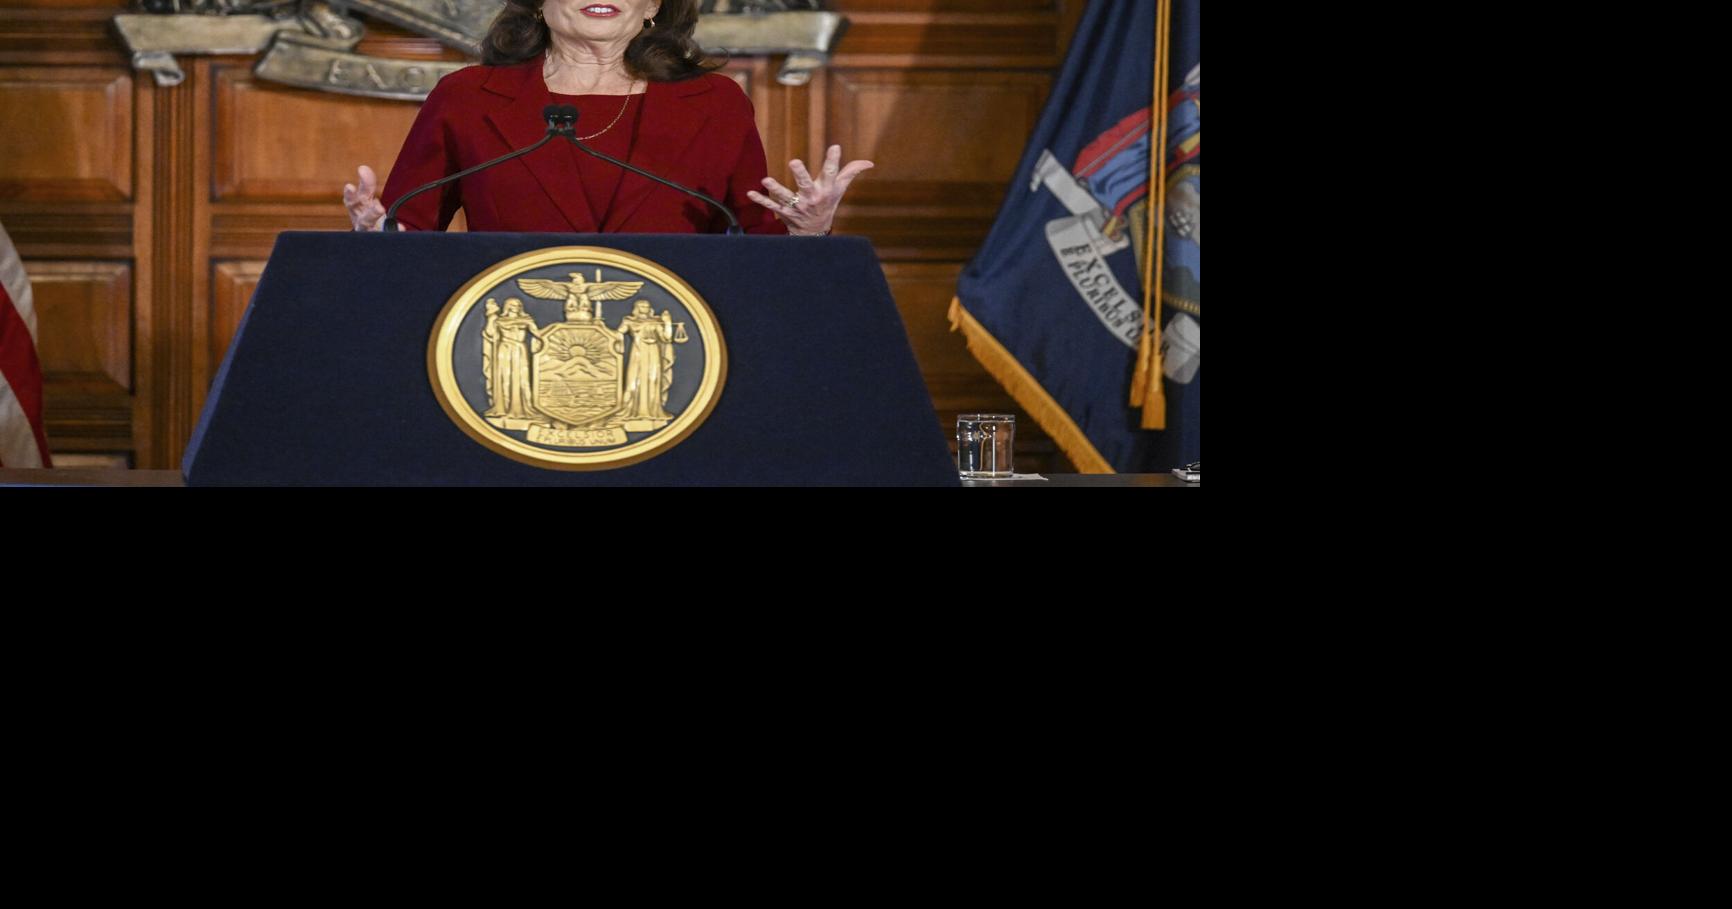 Who’s looking out for you? Not Albany’s Democratic majority